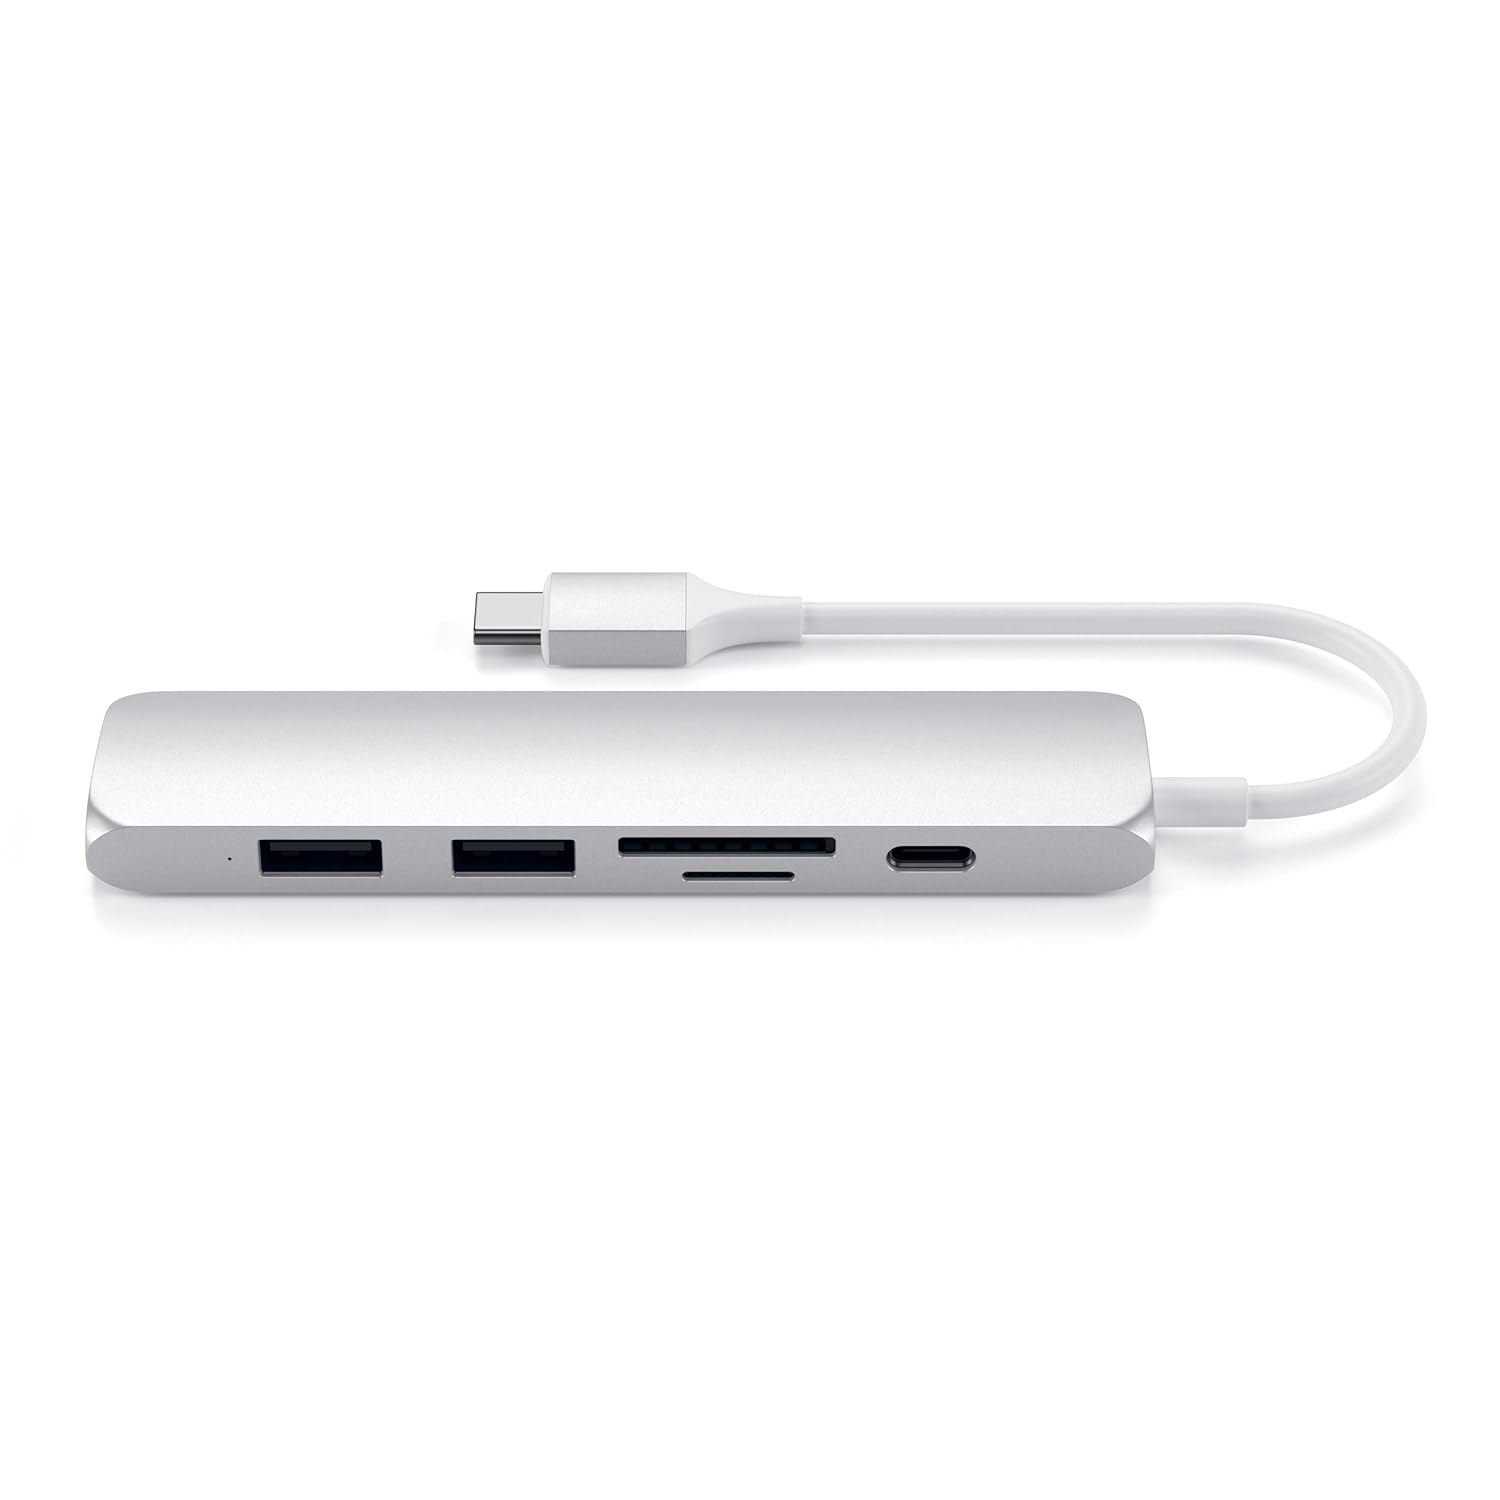 Satechi Slim Aluminum Type-C Multi-Port Adapter V2 with USB-C PD, 4K HDMI (30Hz), Micro/SD Card Readers, USB 3.0 - Compatible with 2018 MacBook Pro/Air, 2018 iPad Pro, Microsoft Surface Go (Silver)